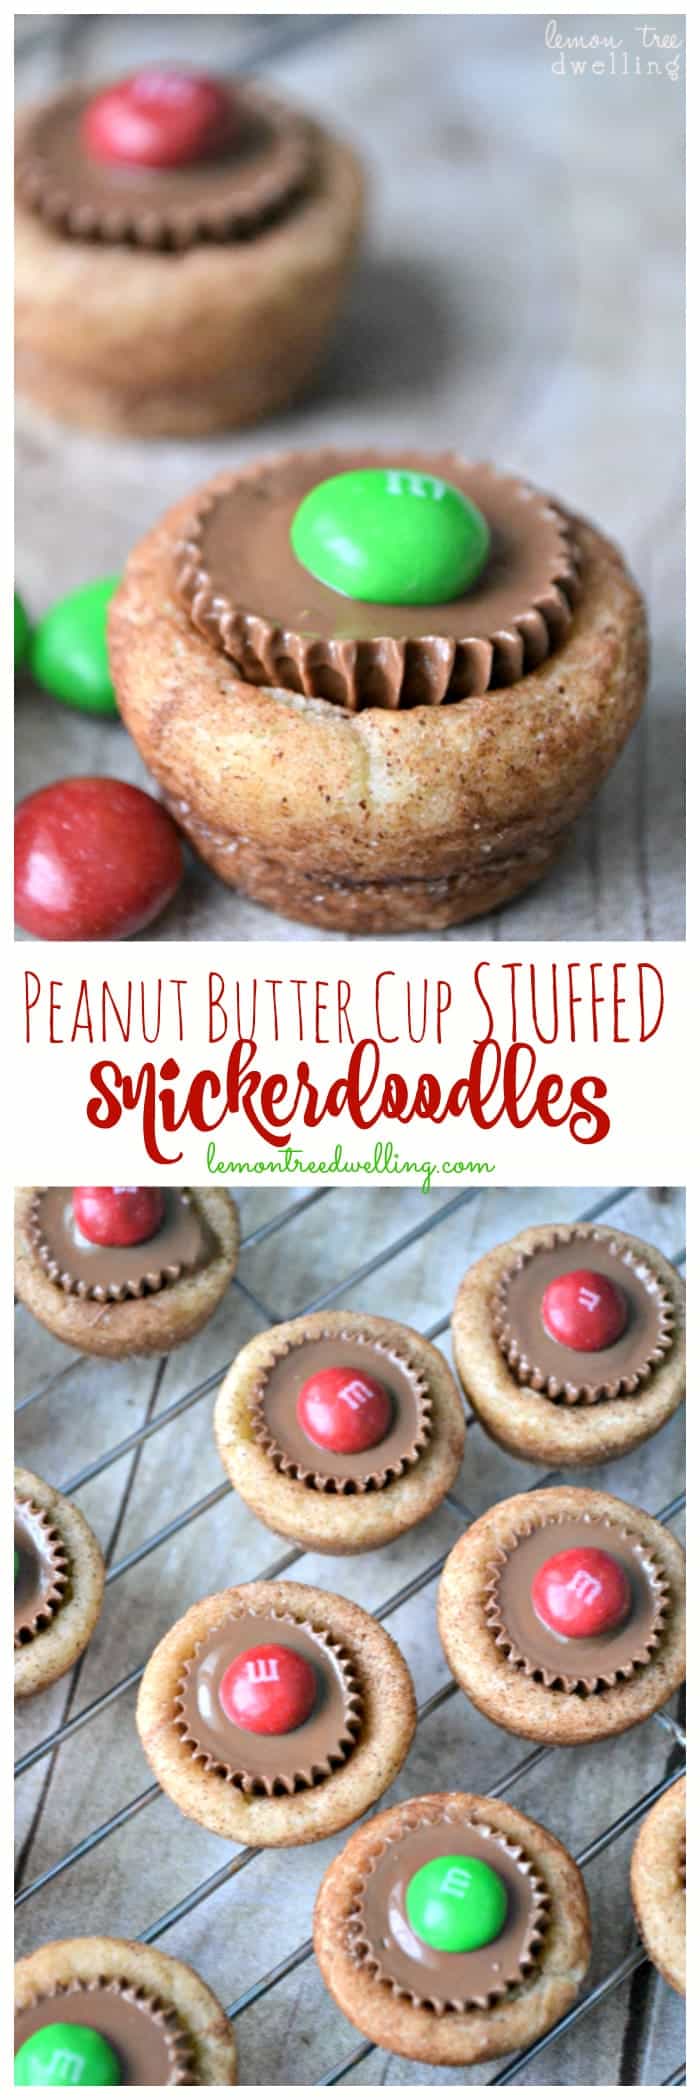 Peanut Butter Cup Stuffed Snickerdoodles are a sweet treat that will please even your biggest critics. These delightful stuffed snickerdoodles area fun and delicious combination....perfect for Christmas!